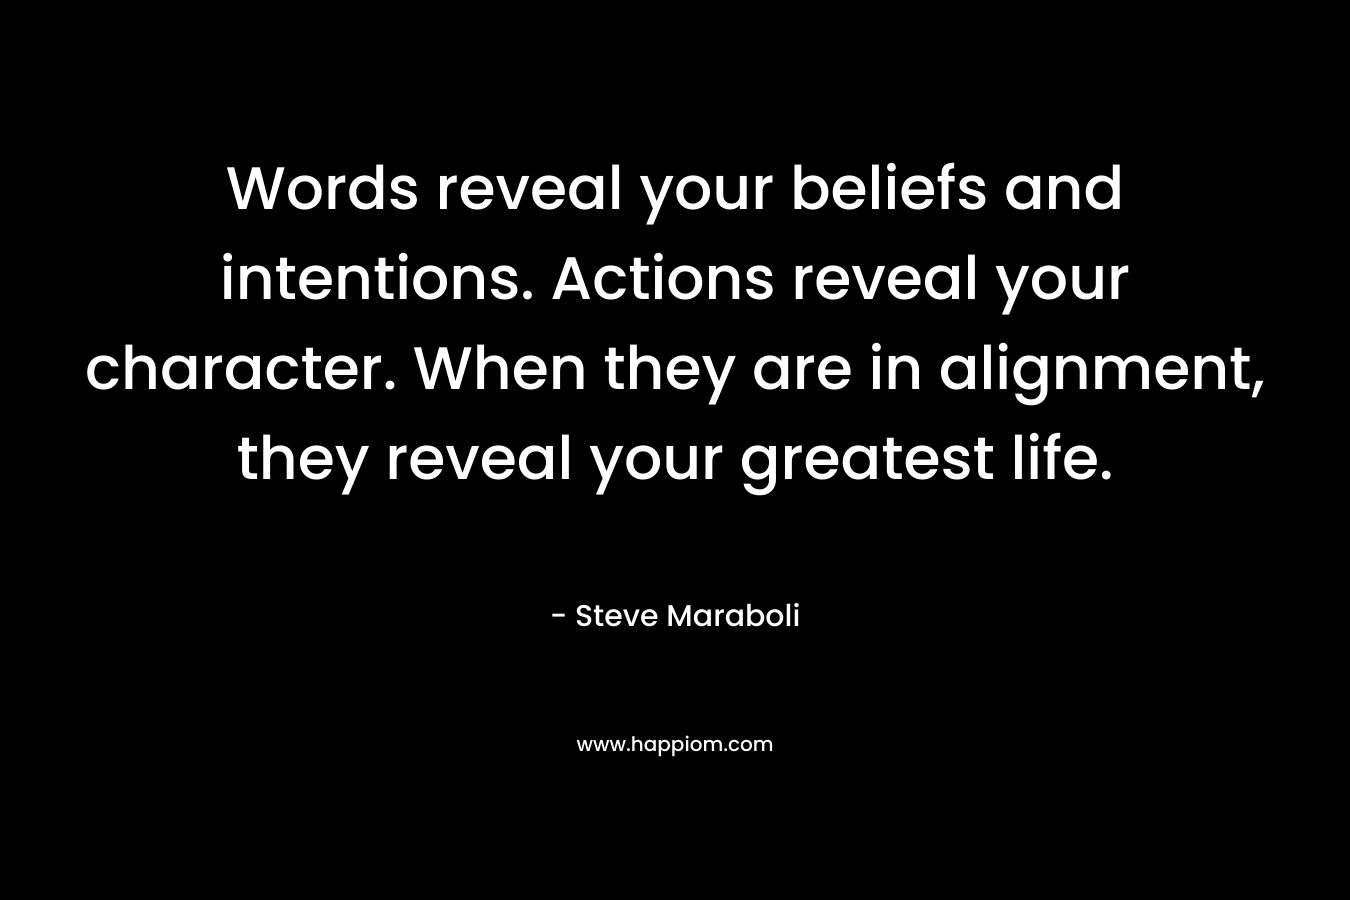 Words reveal your beliefs and intentions. Actions reveal your character. When they are in alignment, they reveal your greatest life. – Steve Maraboli